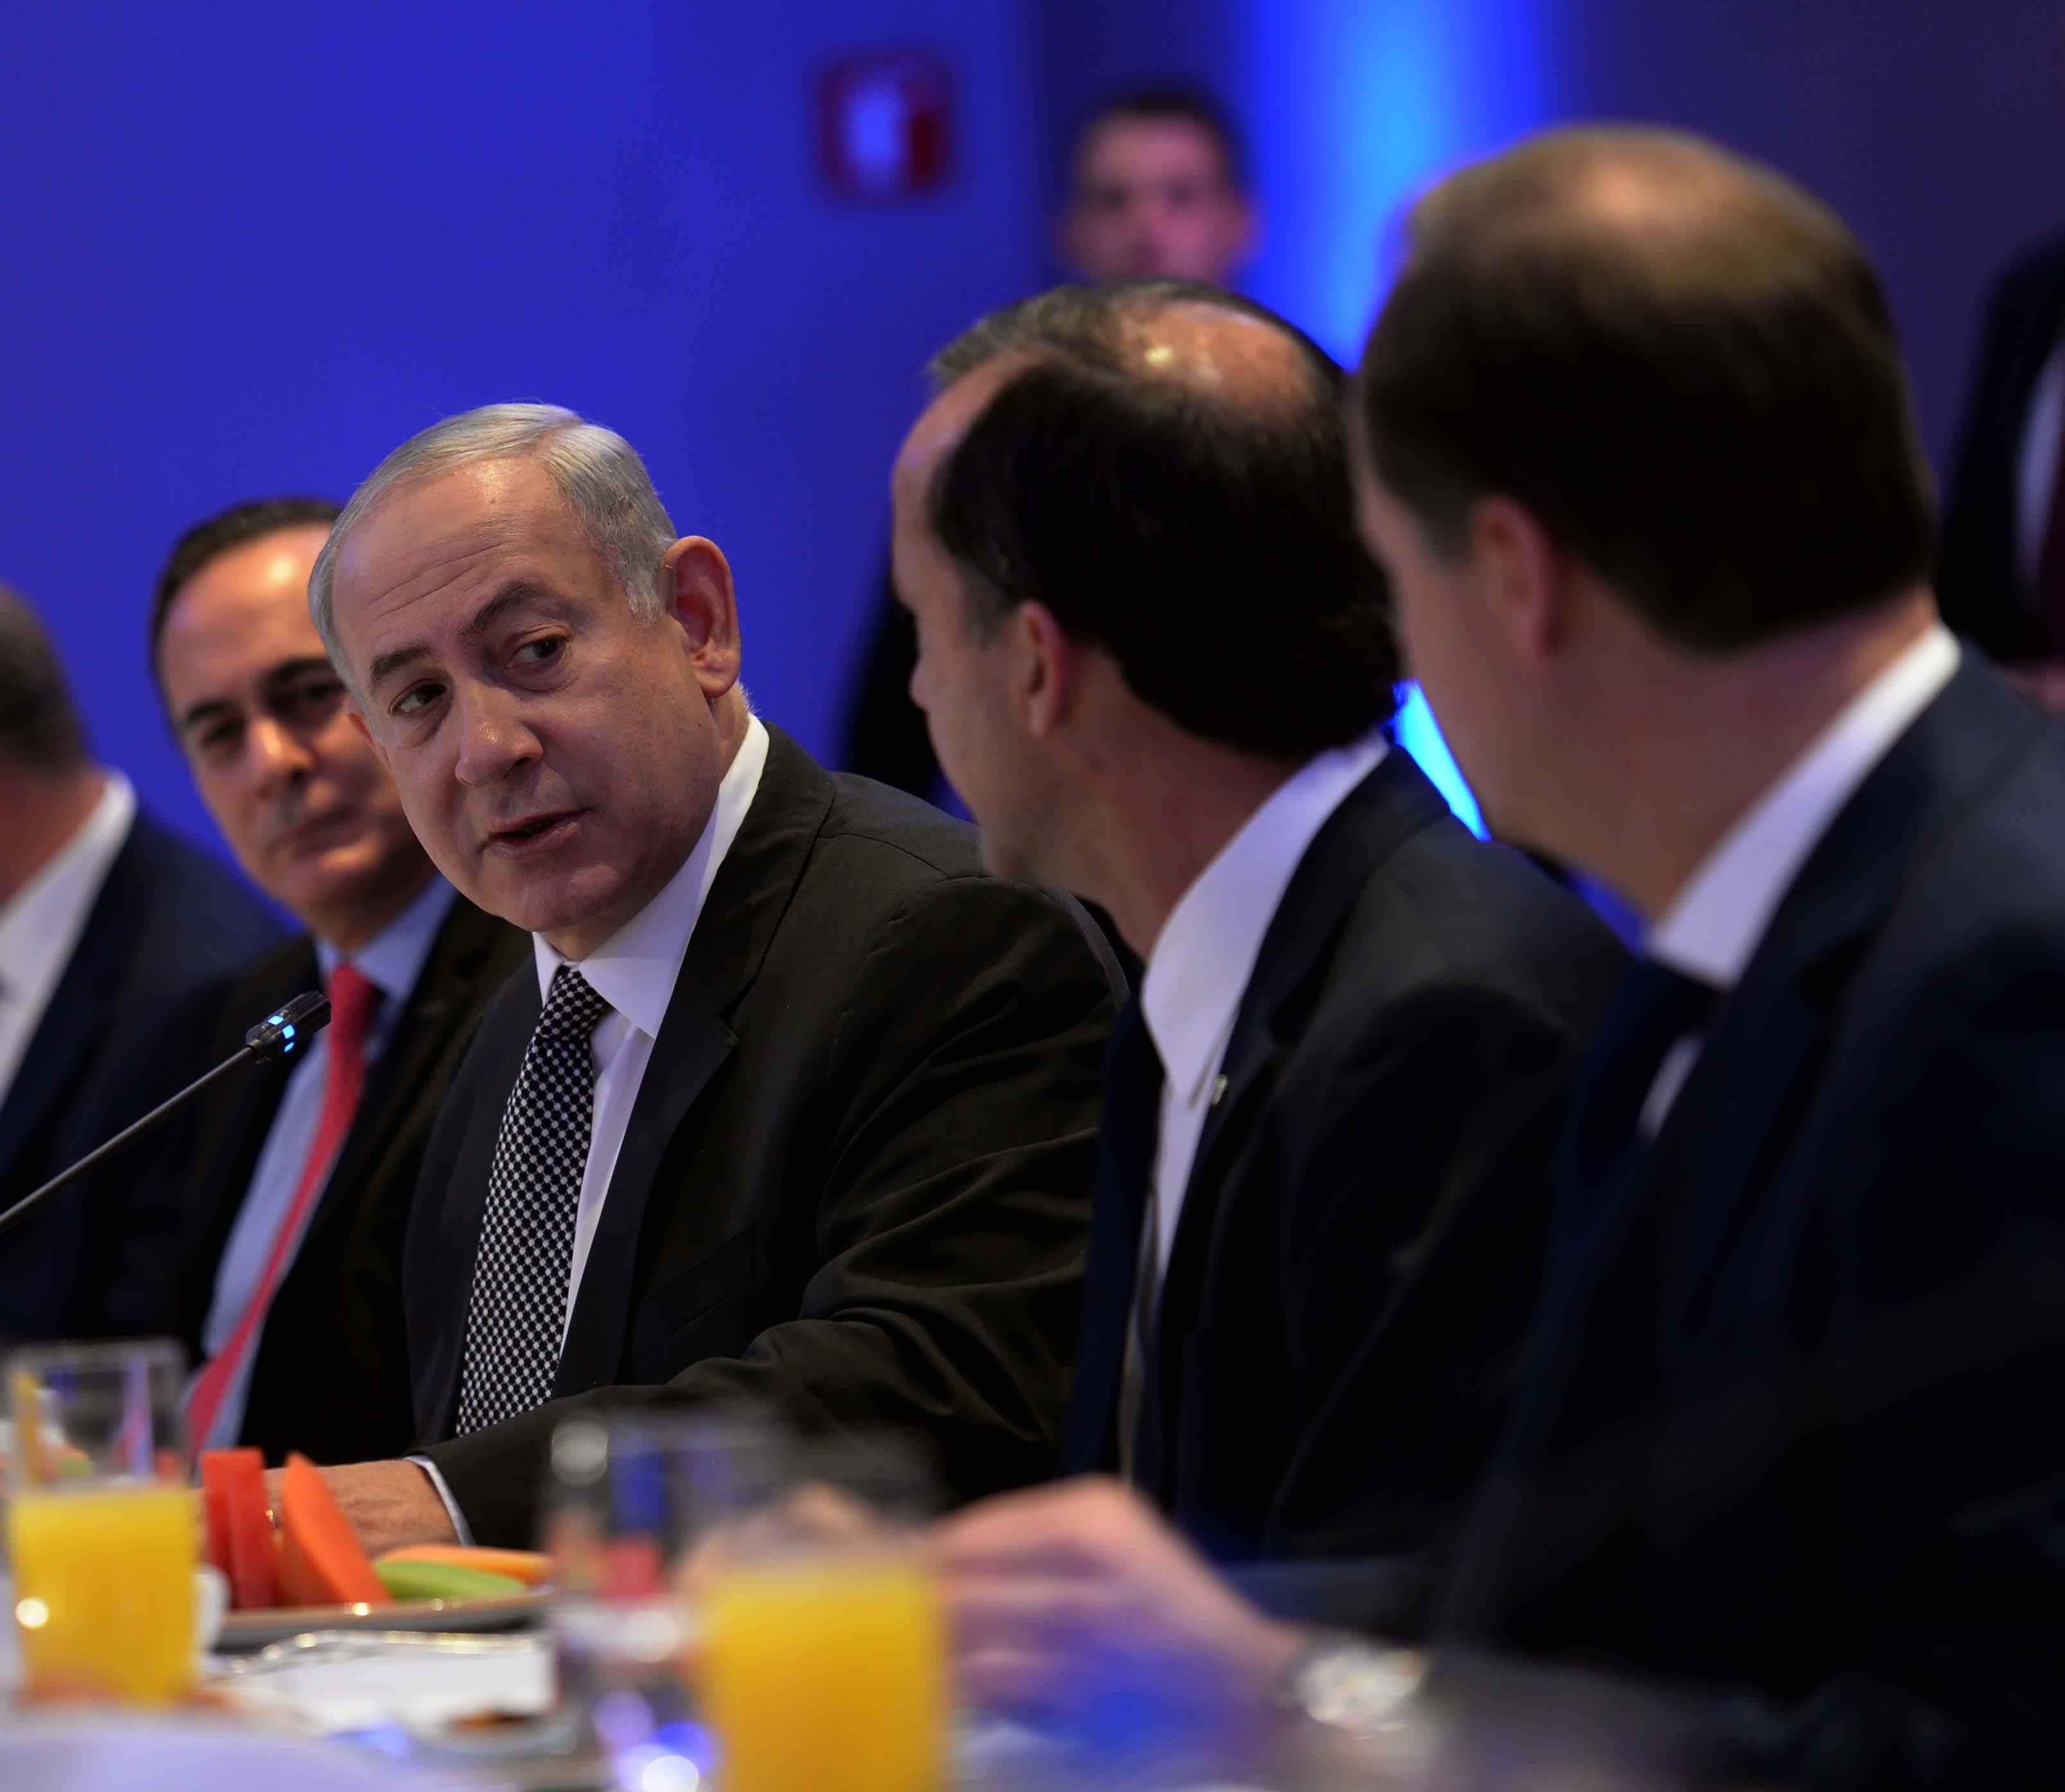  Prime Minister Netanyahu is speaking with the top businessmen of Mexico. (Avi Ohayon/GPO)